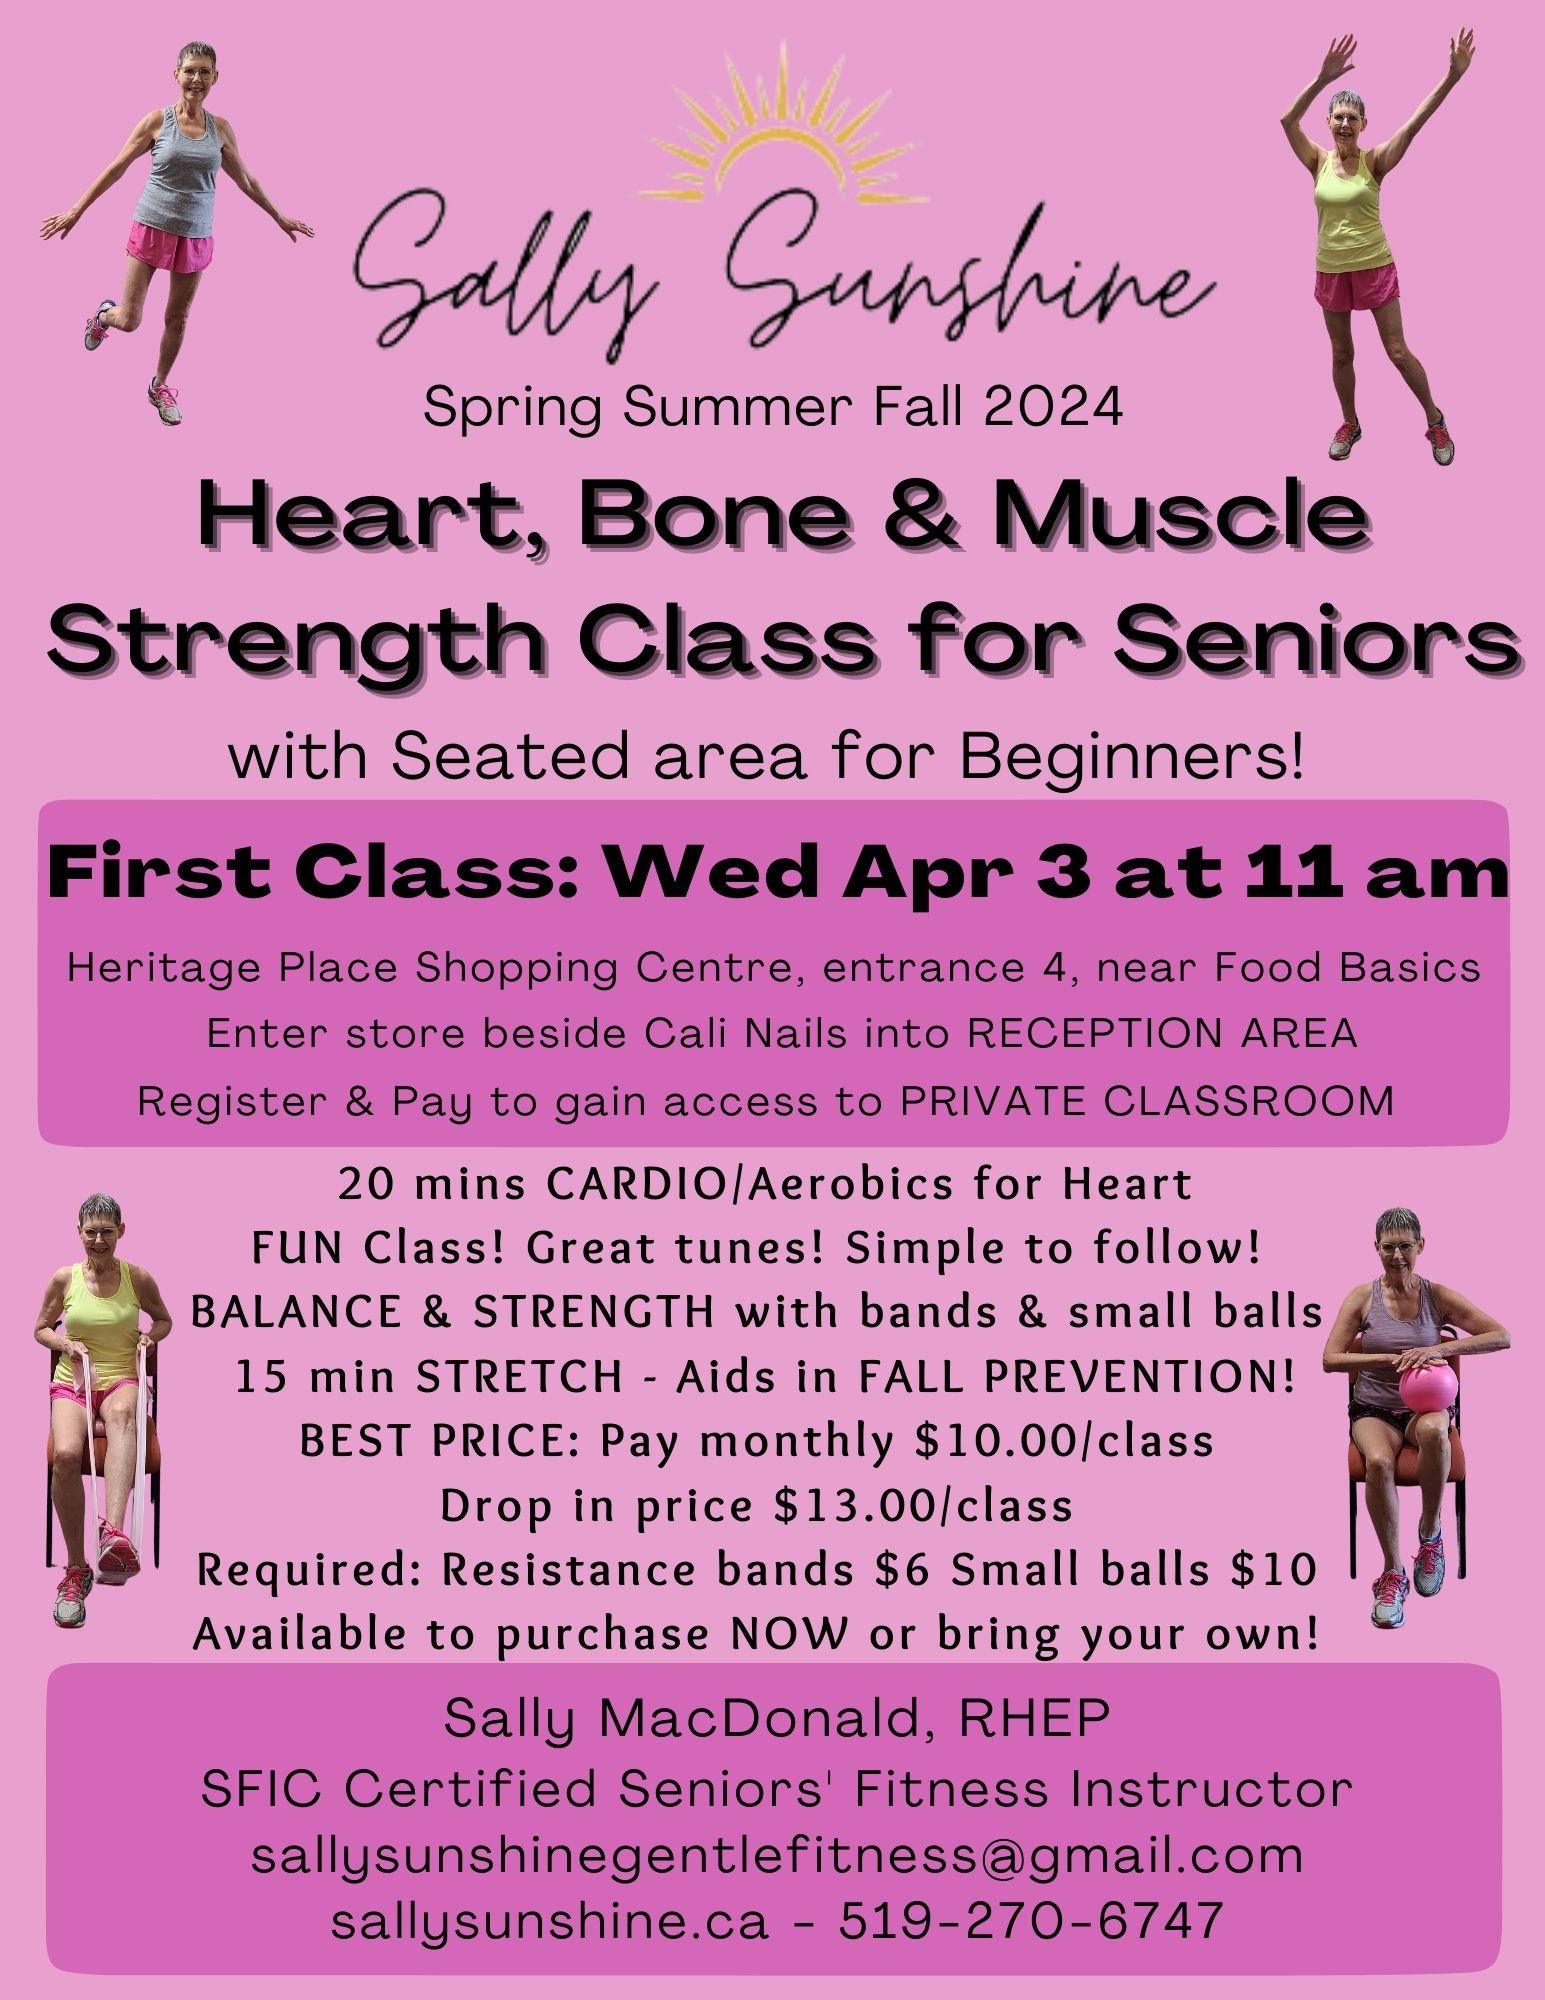 You are currently viewing Wed Heritage Mall- Seniors Heart, Bone & Muscle Strength class